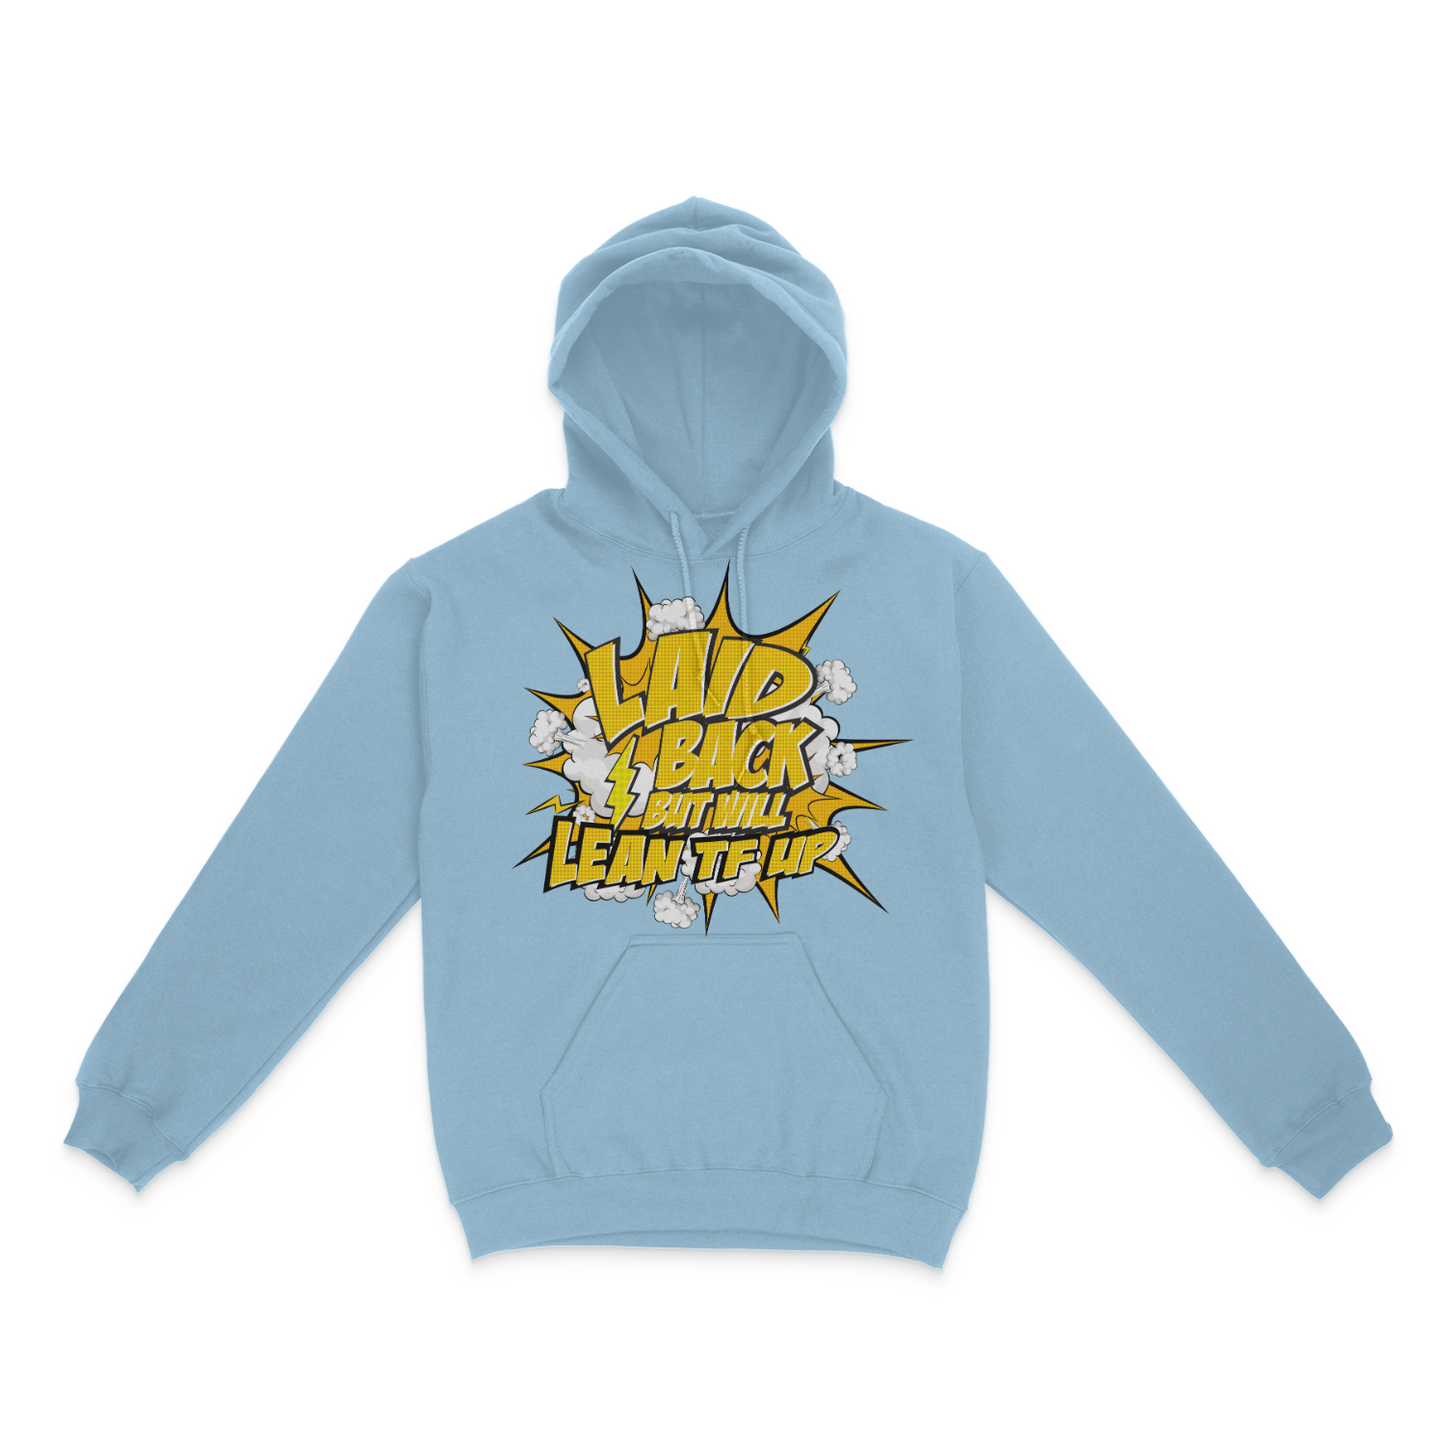 Laid Back, But Will Lean TF Up Graphic Unisex Hoodie